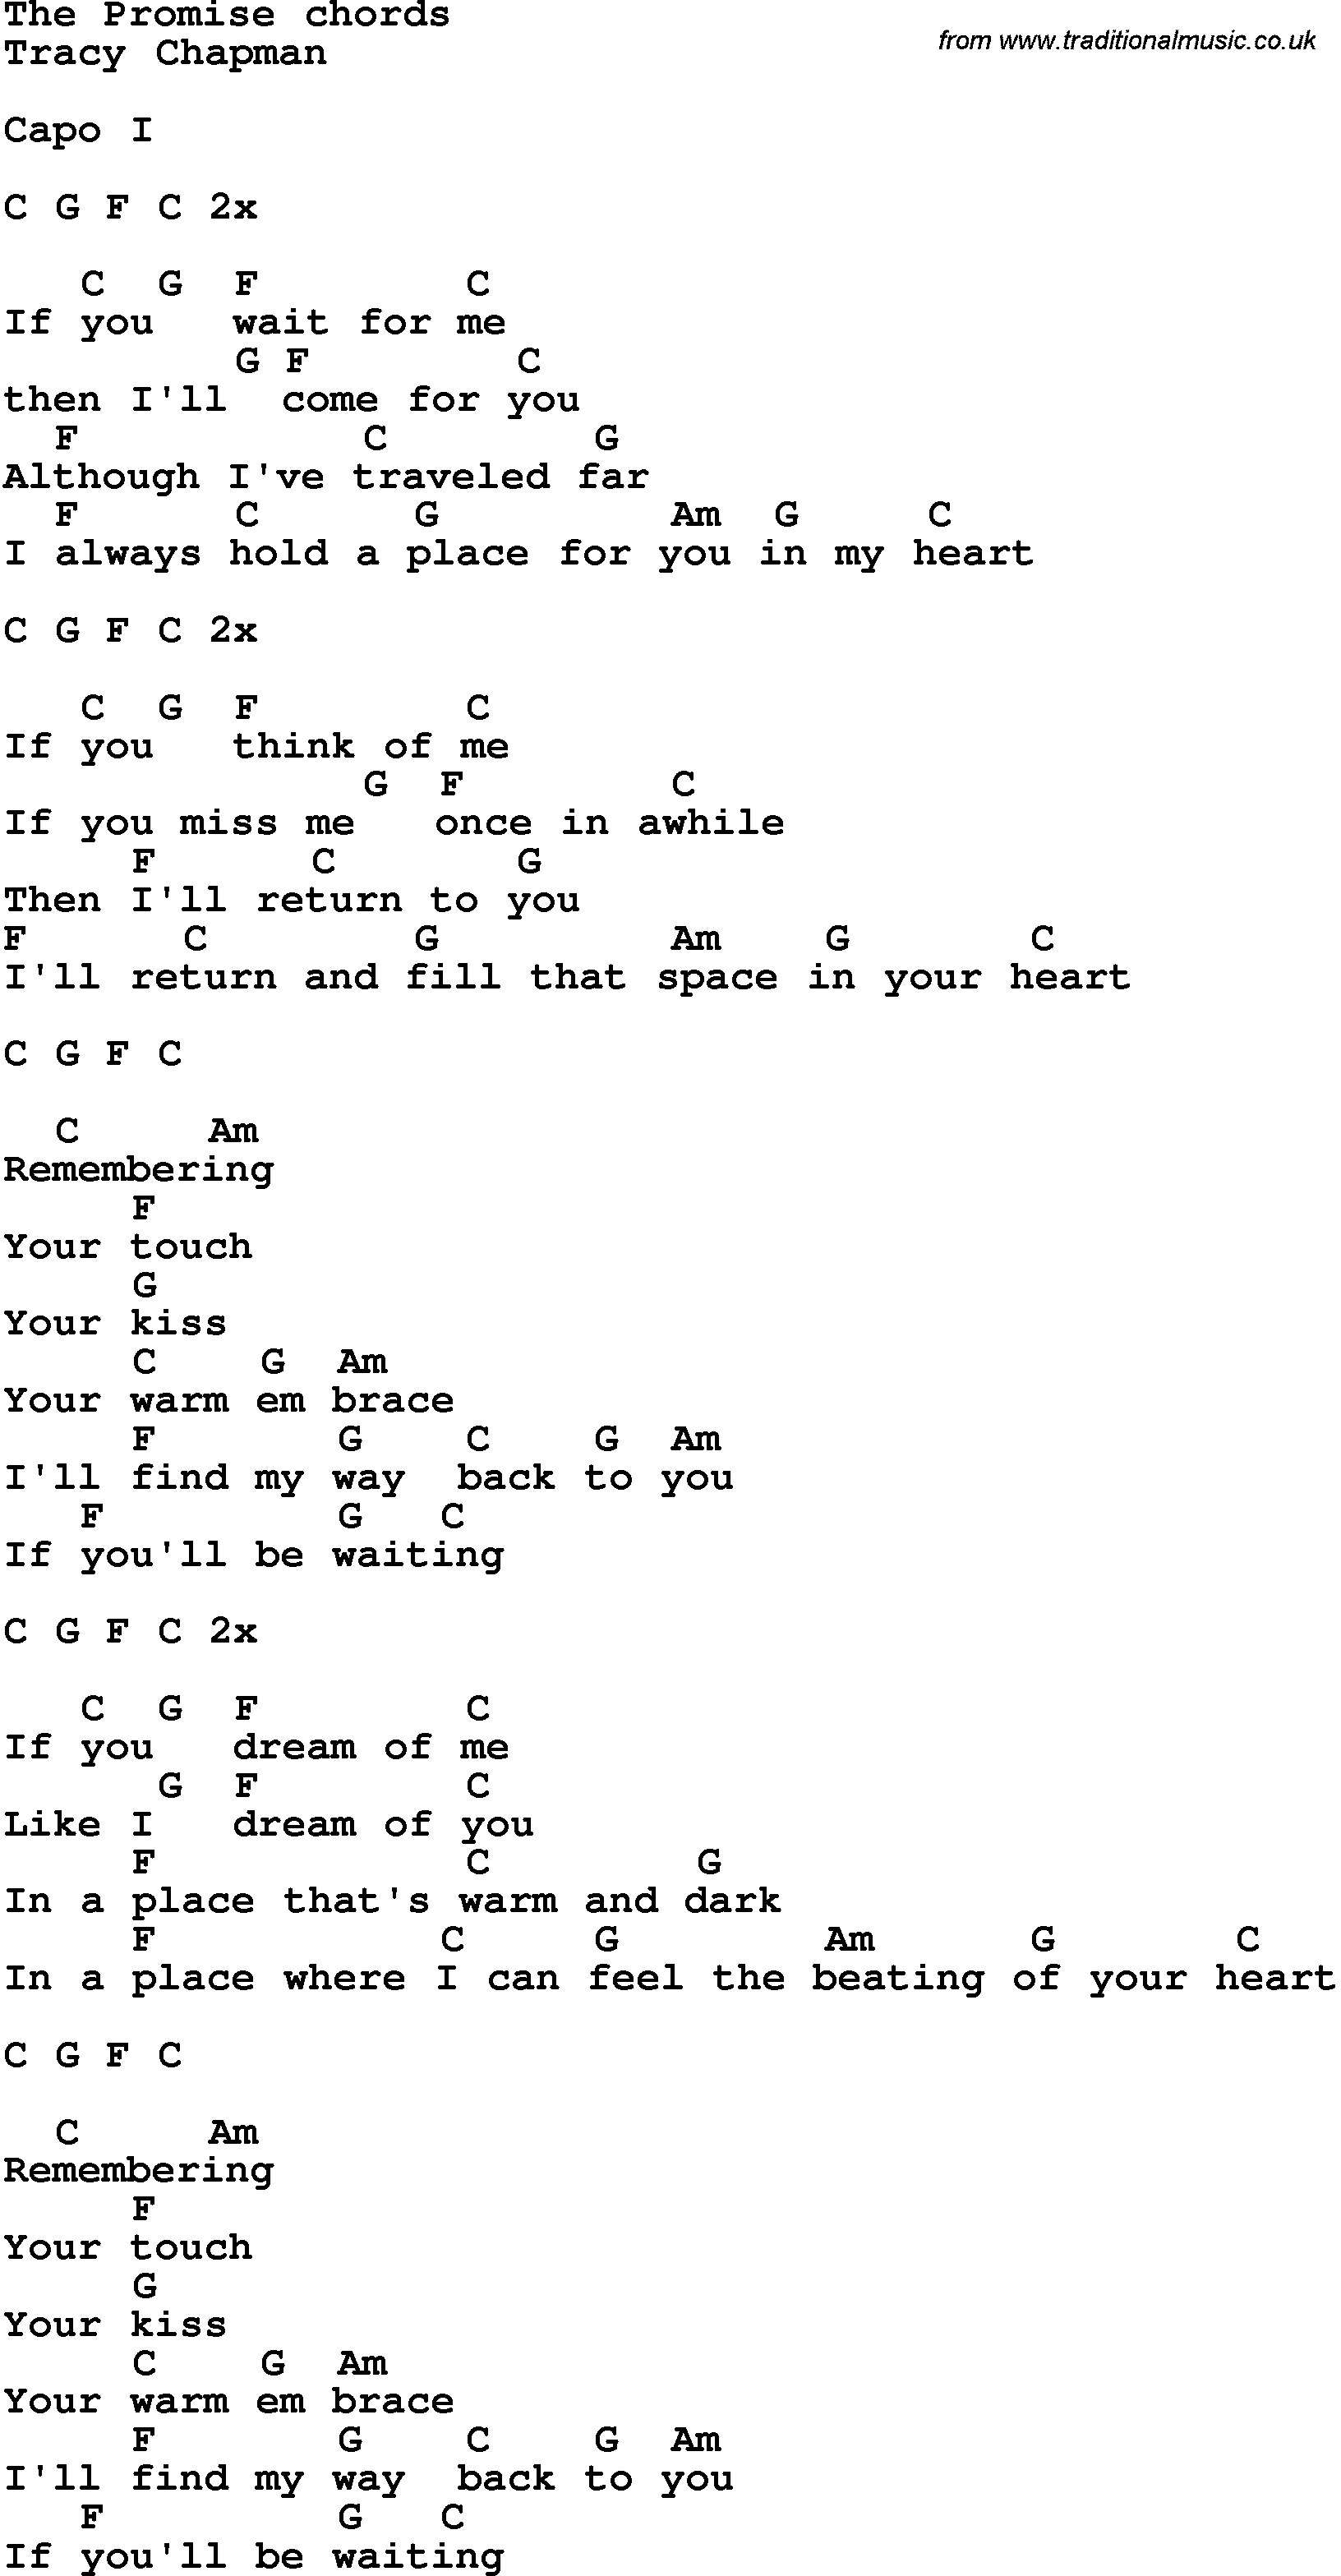 Song Lyrics with guitar chords for The Promise - Tracy Chapman